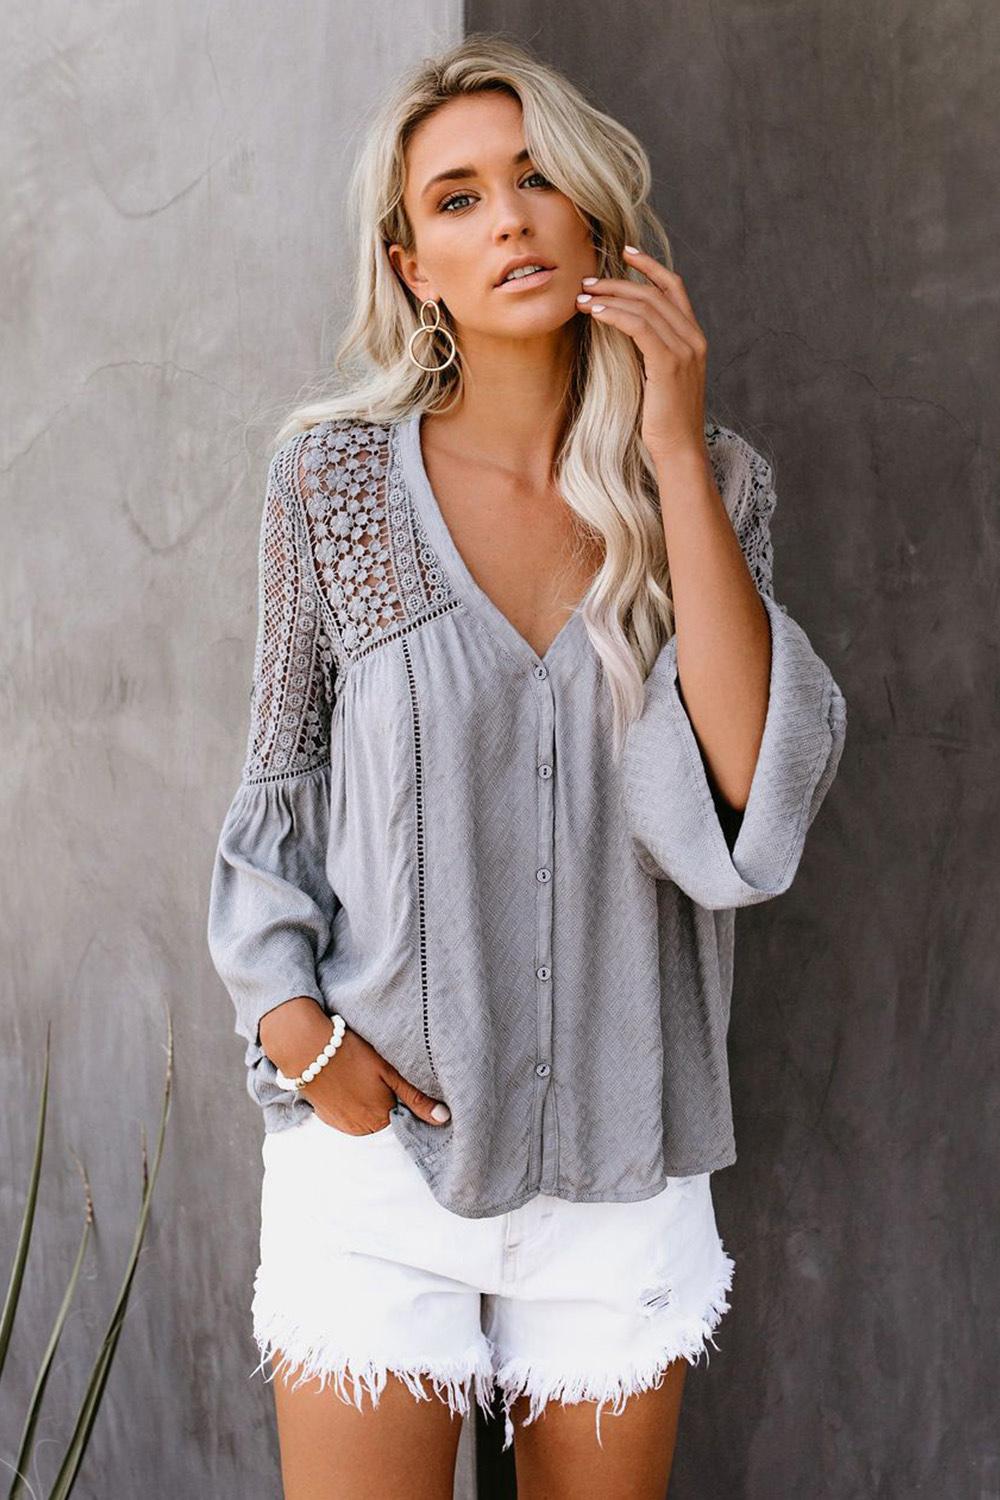 Plus Size So Chic - So Chic Boho Blouse In Gray